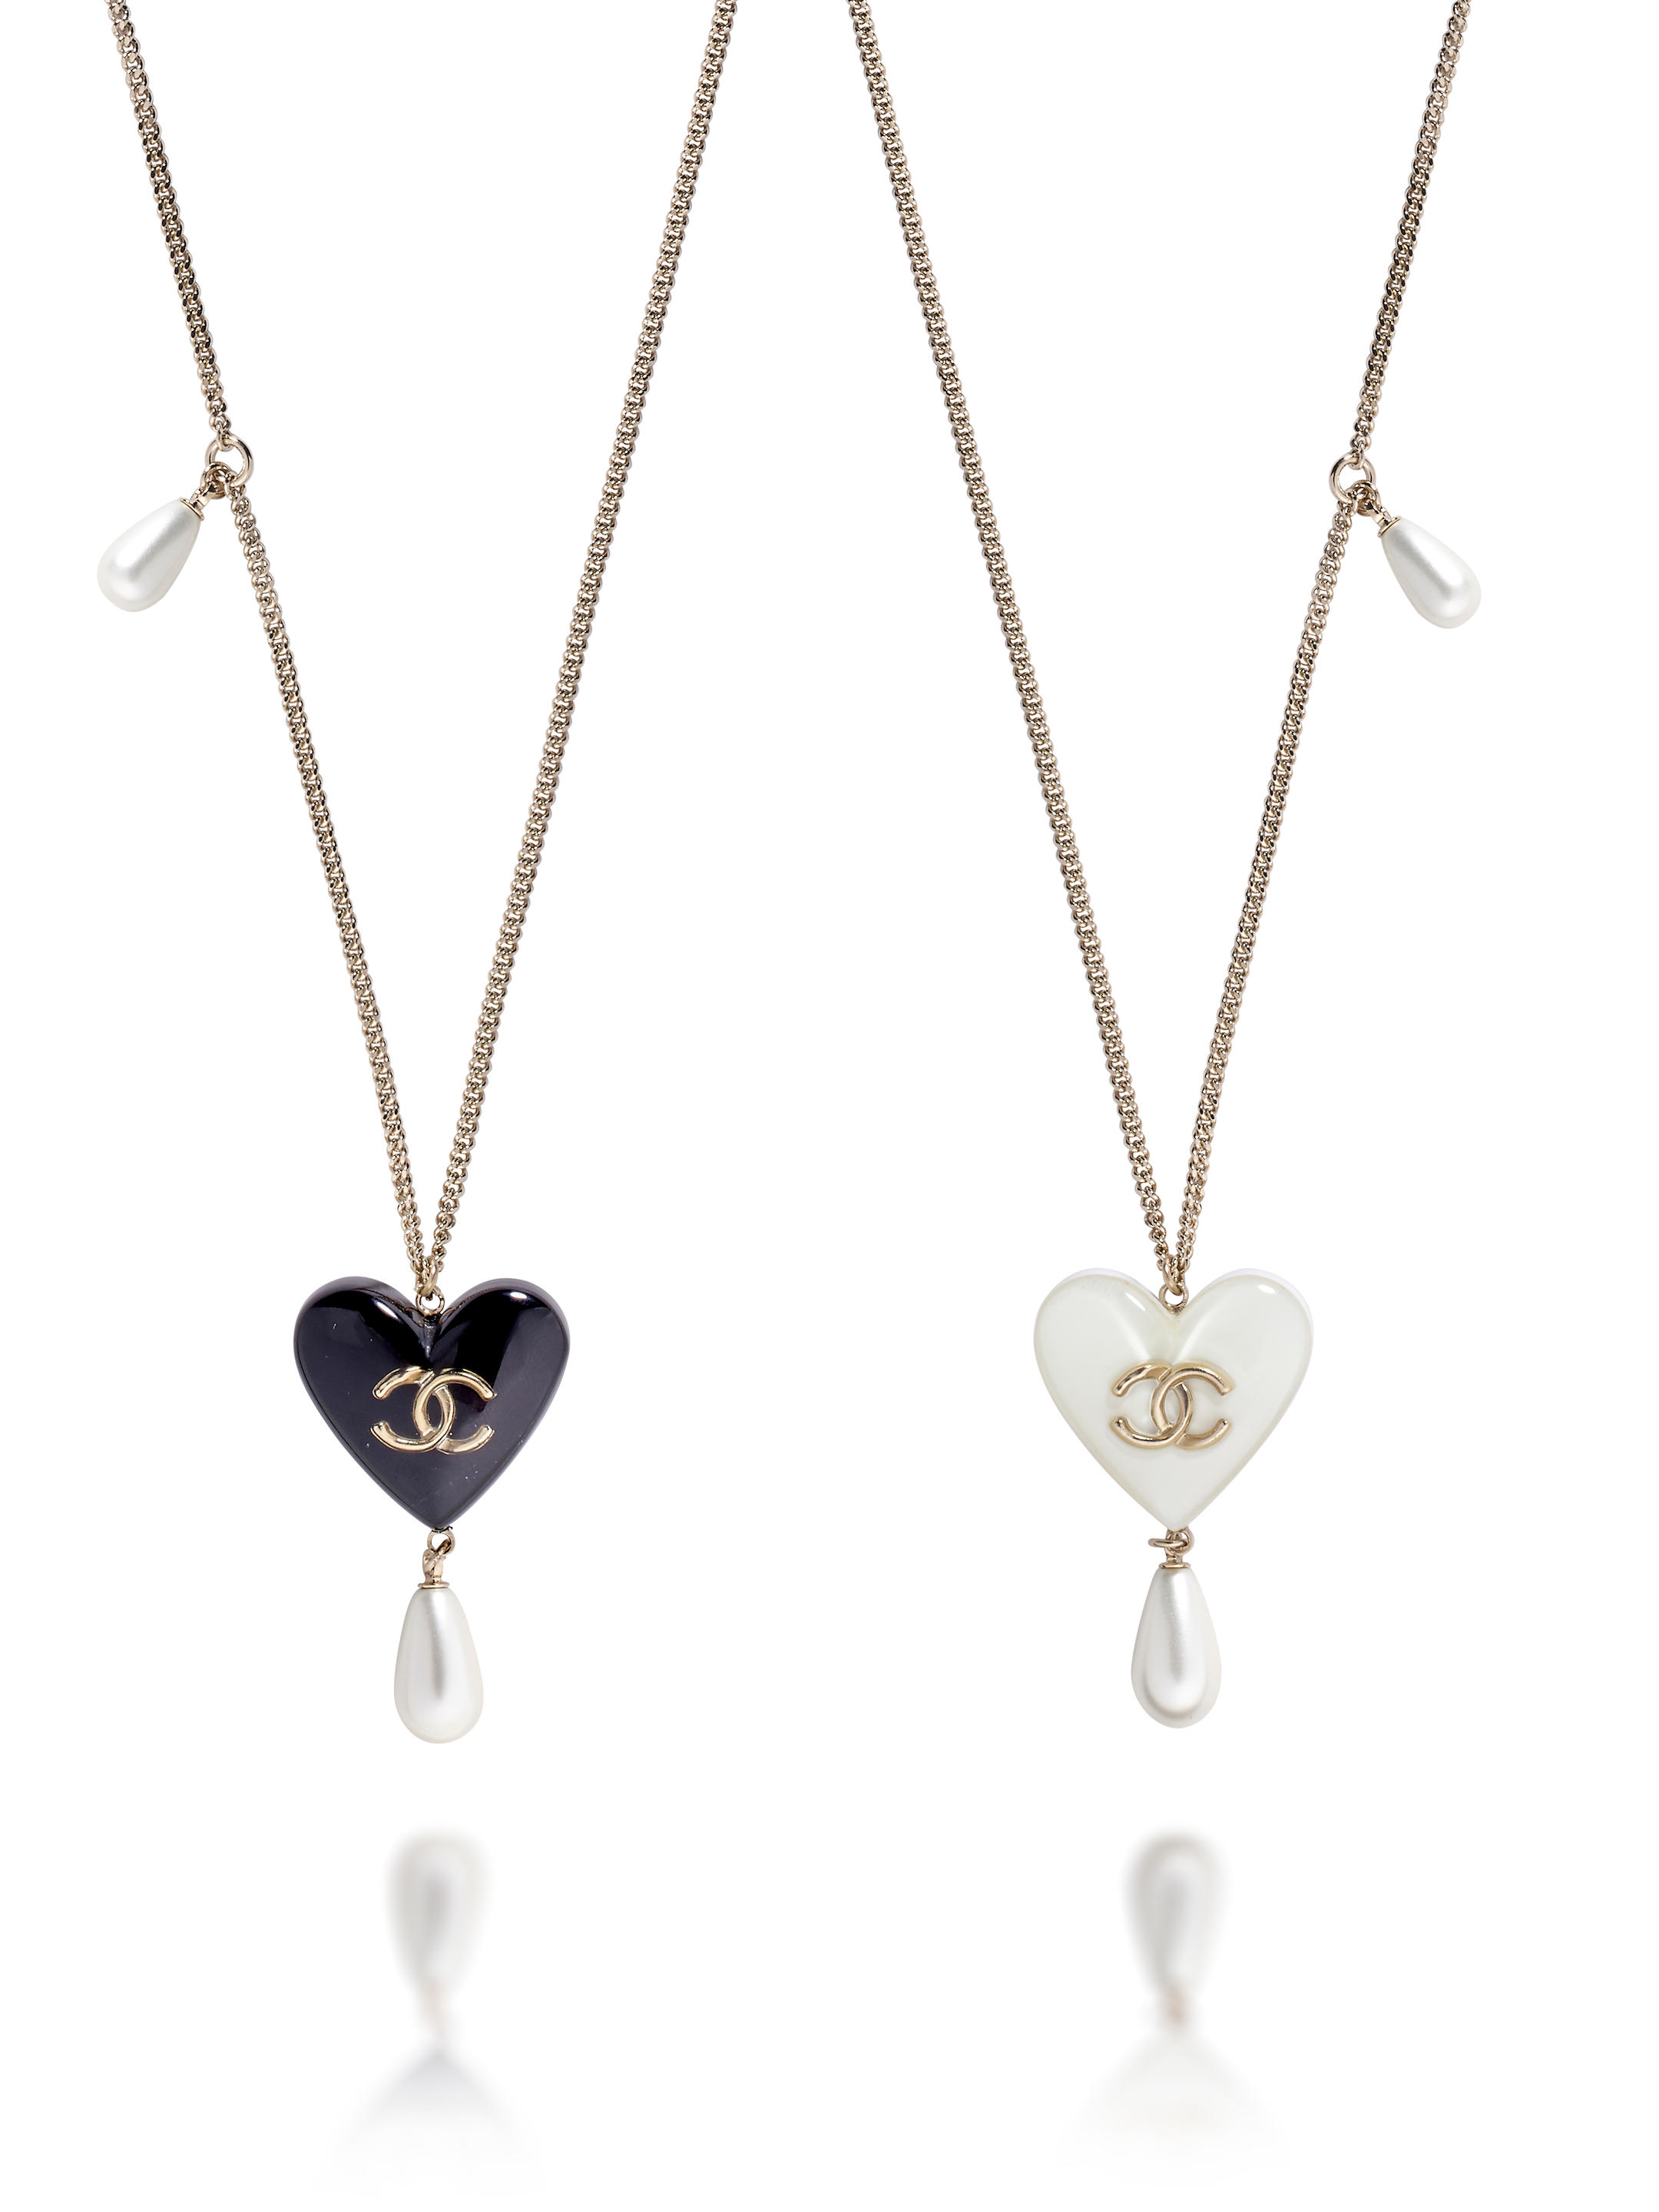 Bonhams : CHANEL WHITE AND BLACK HEART PENDANTS NECKLACE IN GOLD